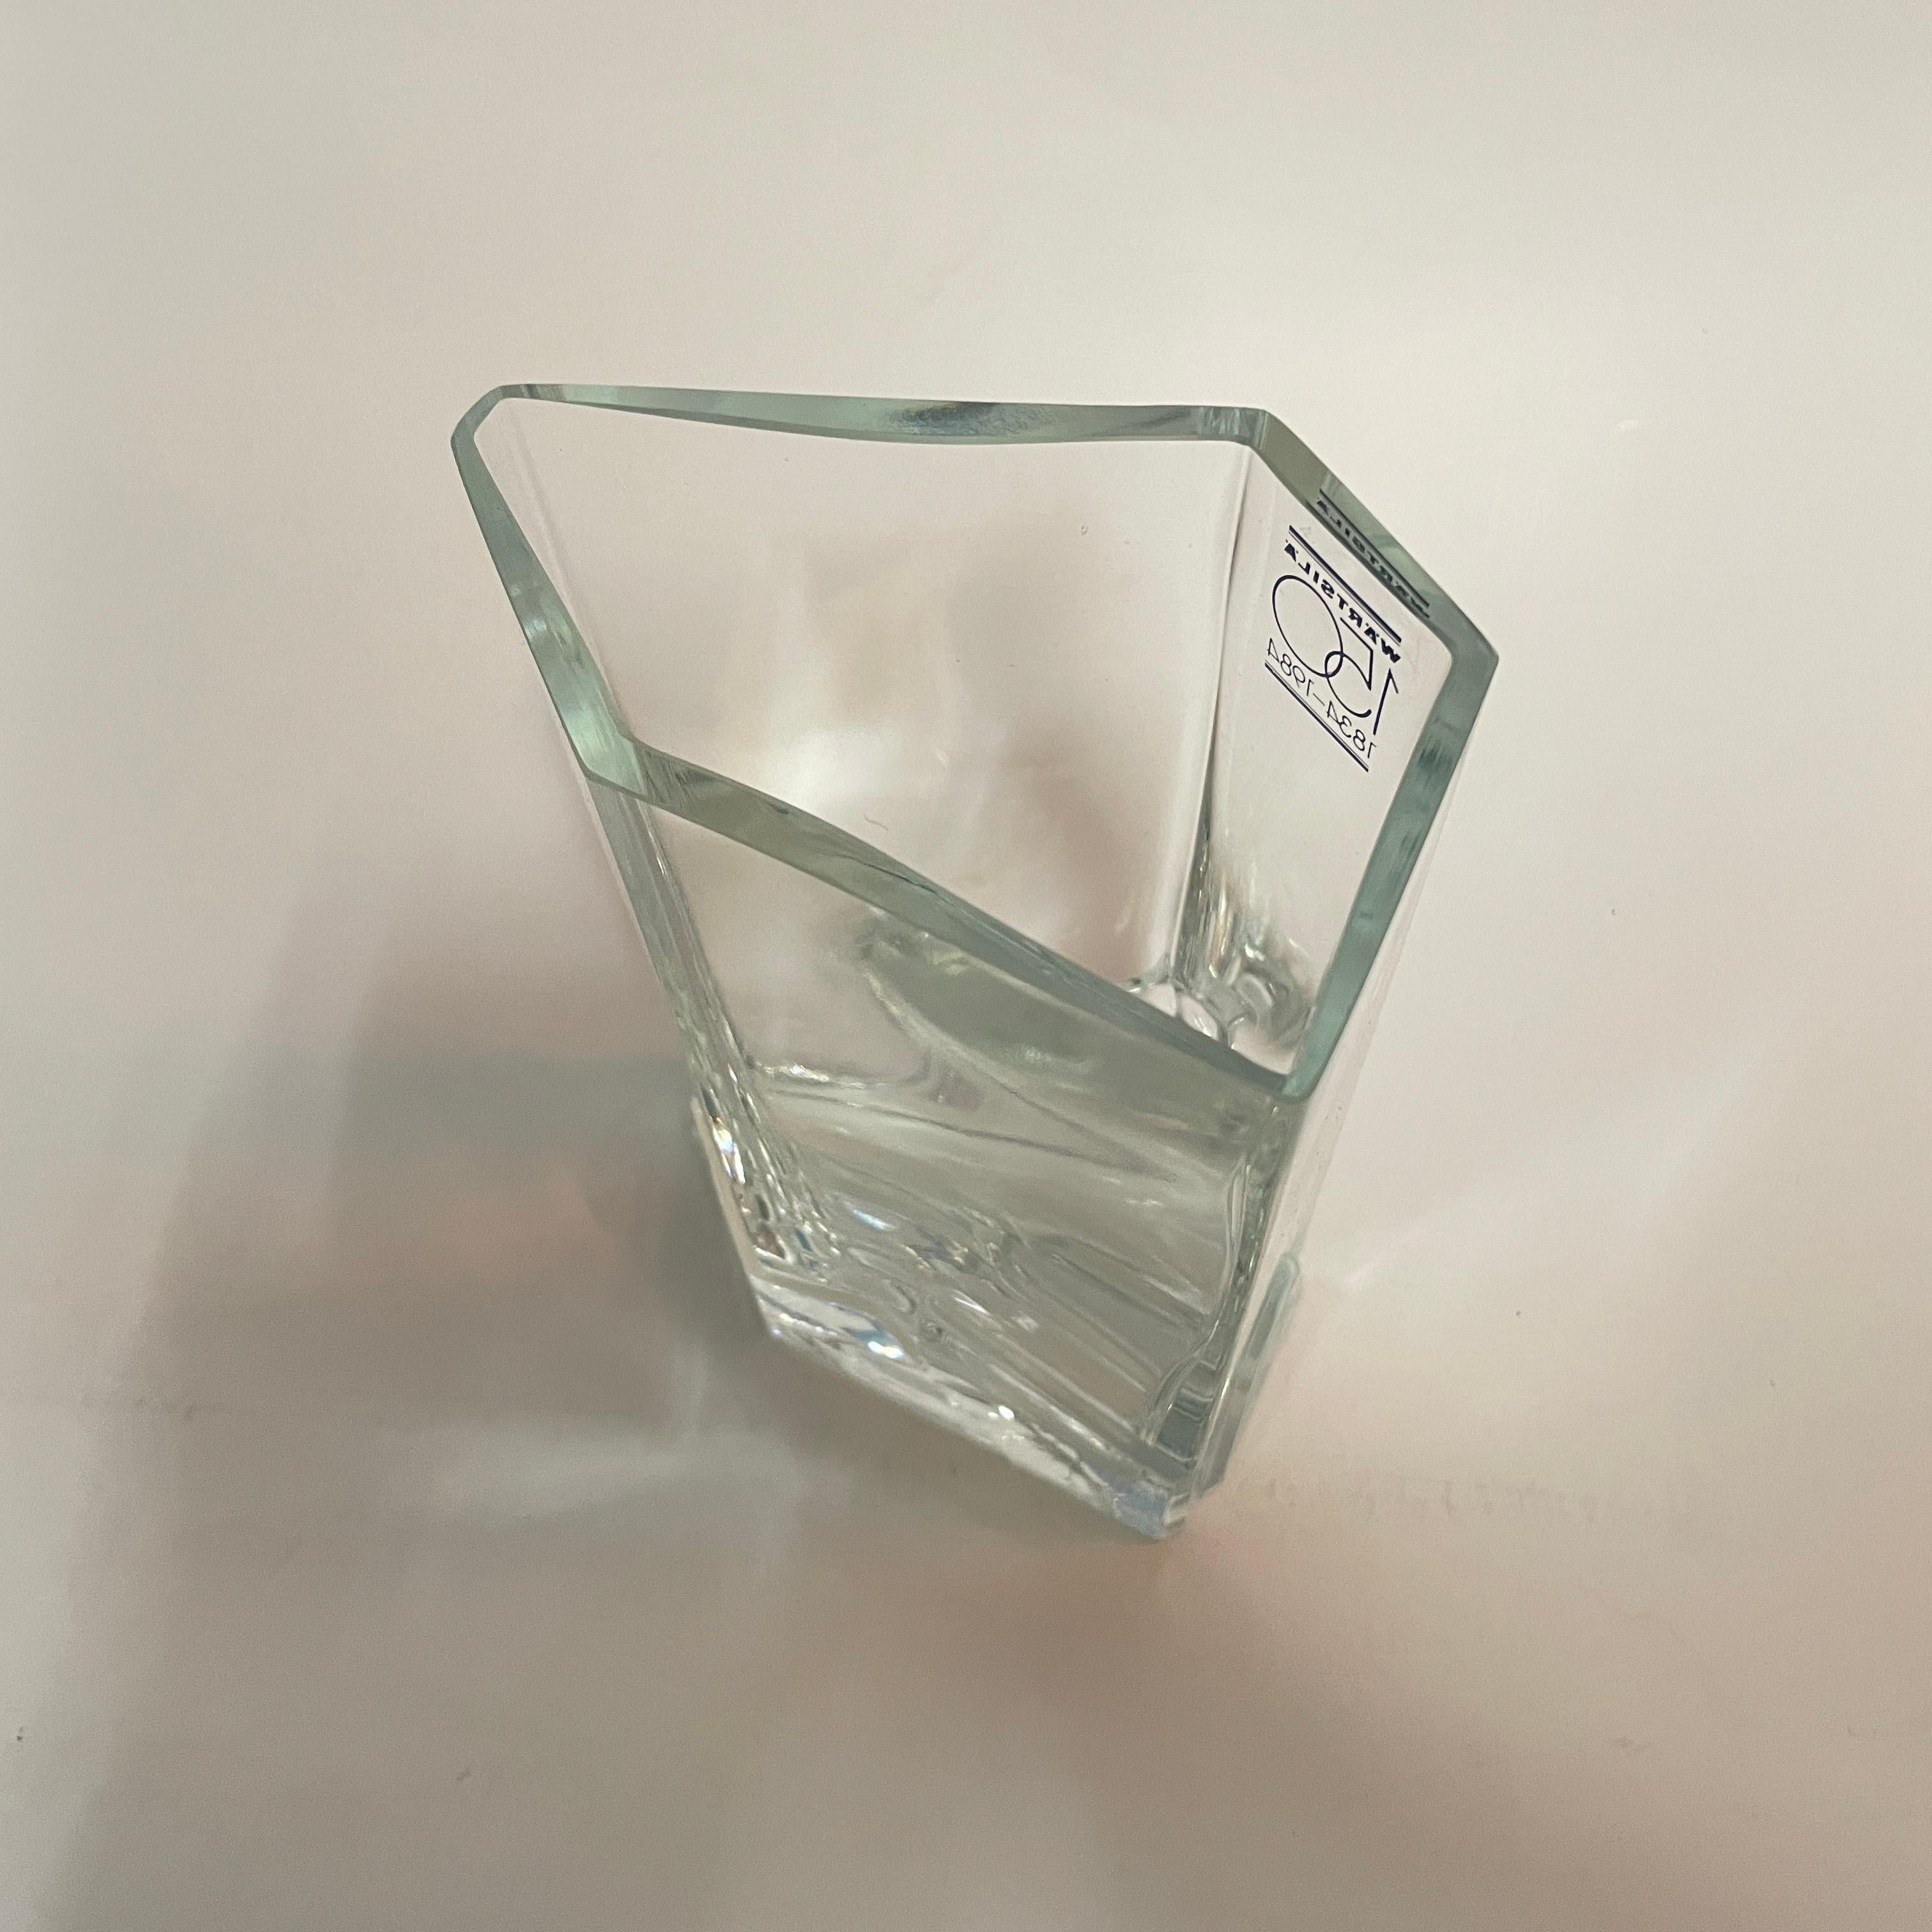 Finnish Clear Glass Vase made by Nuutajärvi glassworks Finland in 1984. For Sale